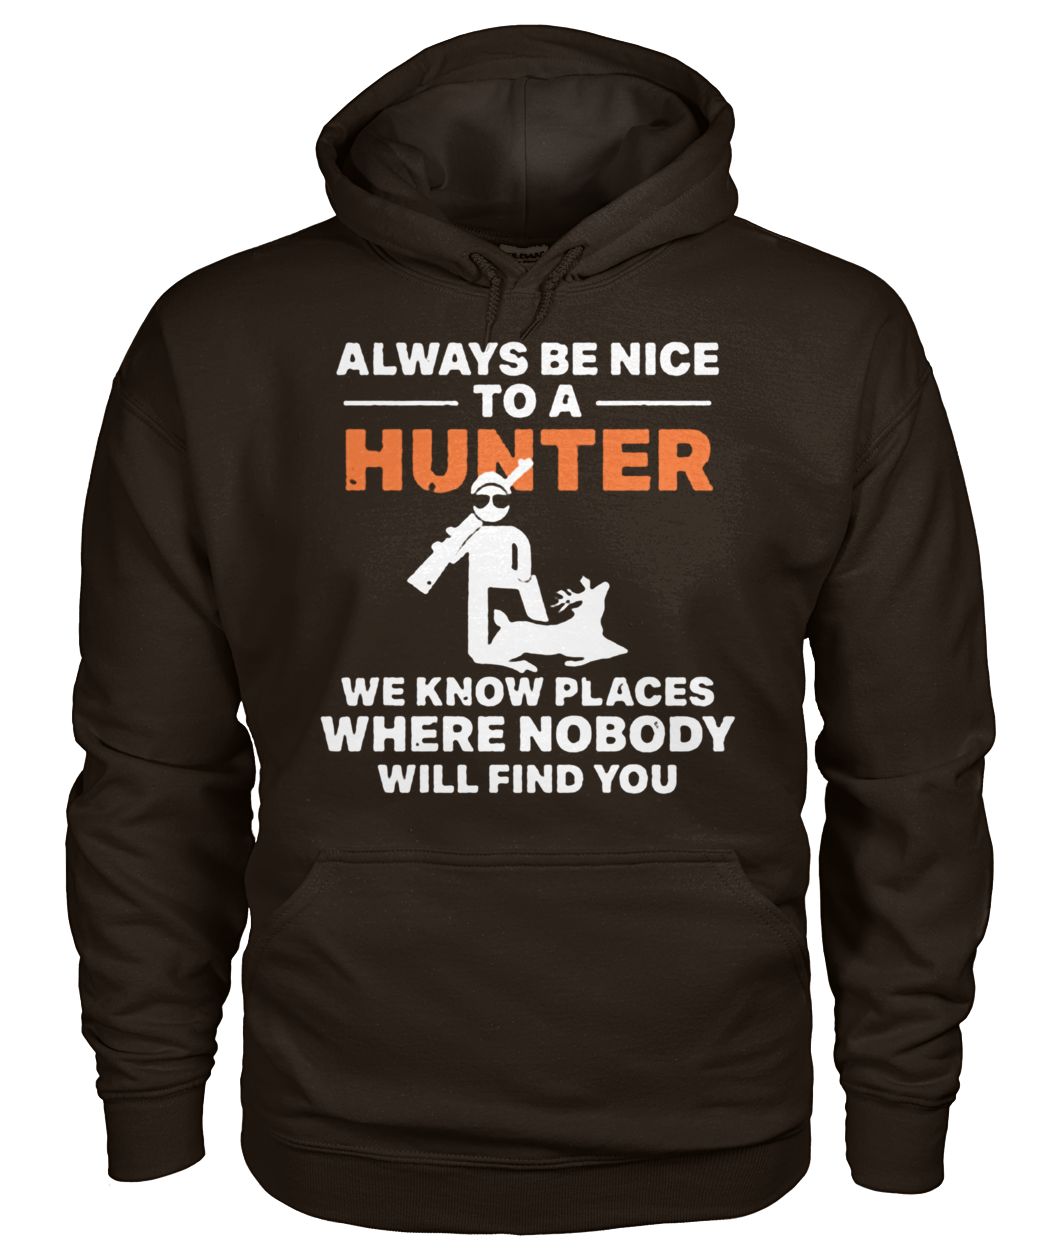 Always be nice to a hunter we know places where nobody will find you gildan hoodie